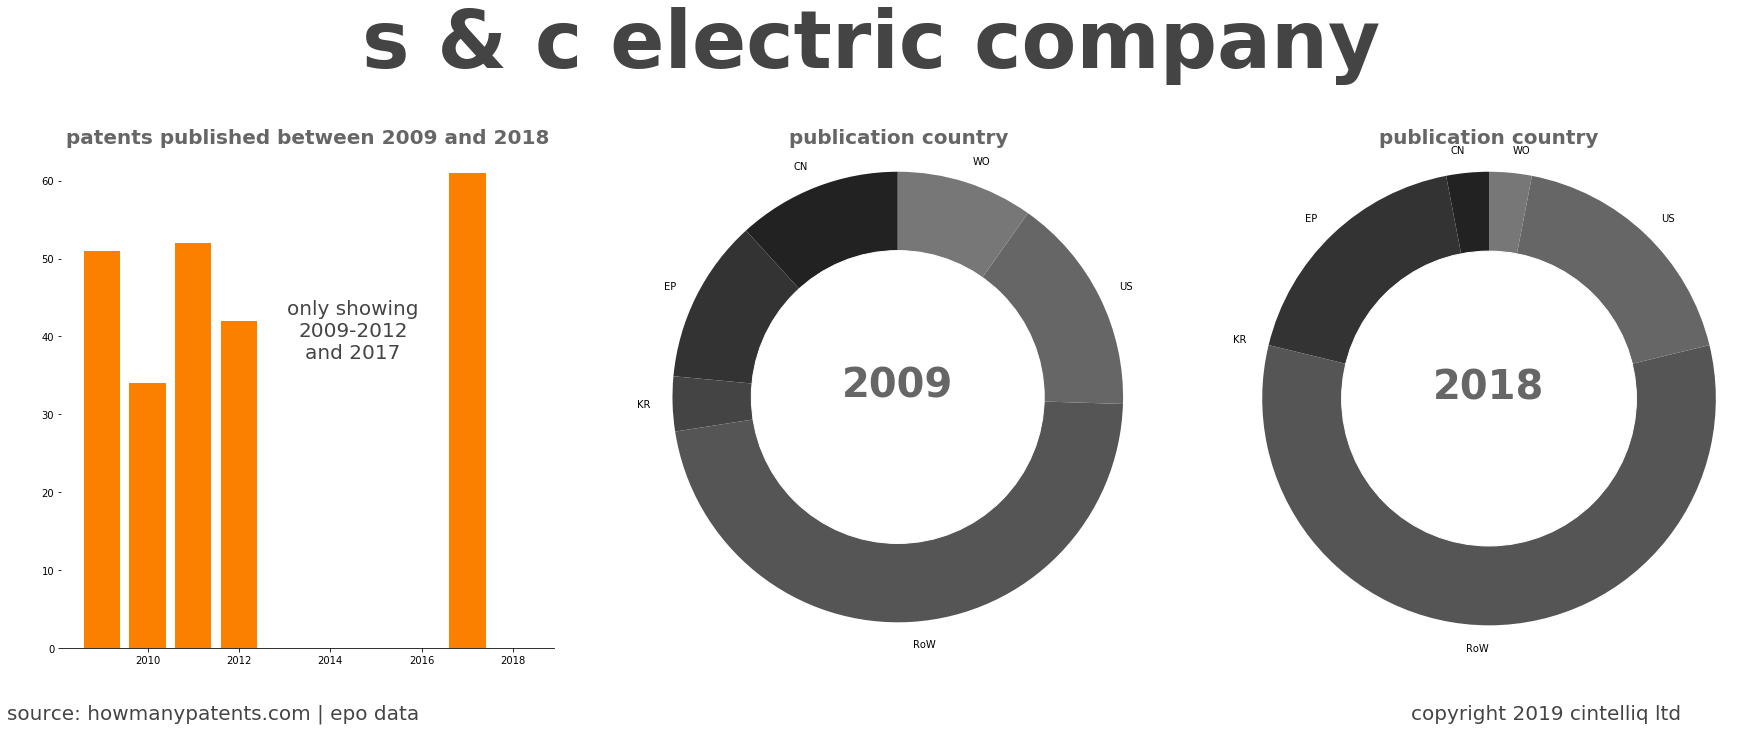 summary of patents for S & C Electric Company